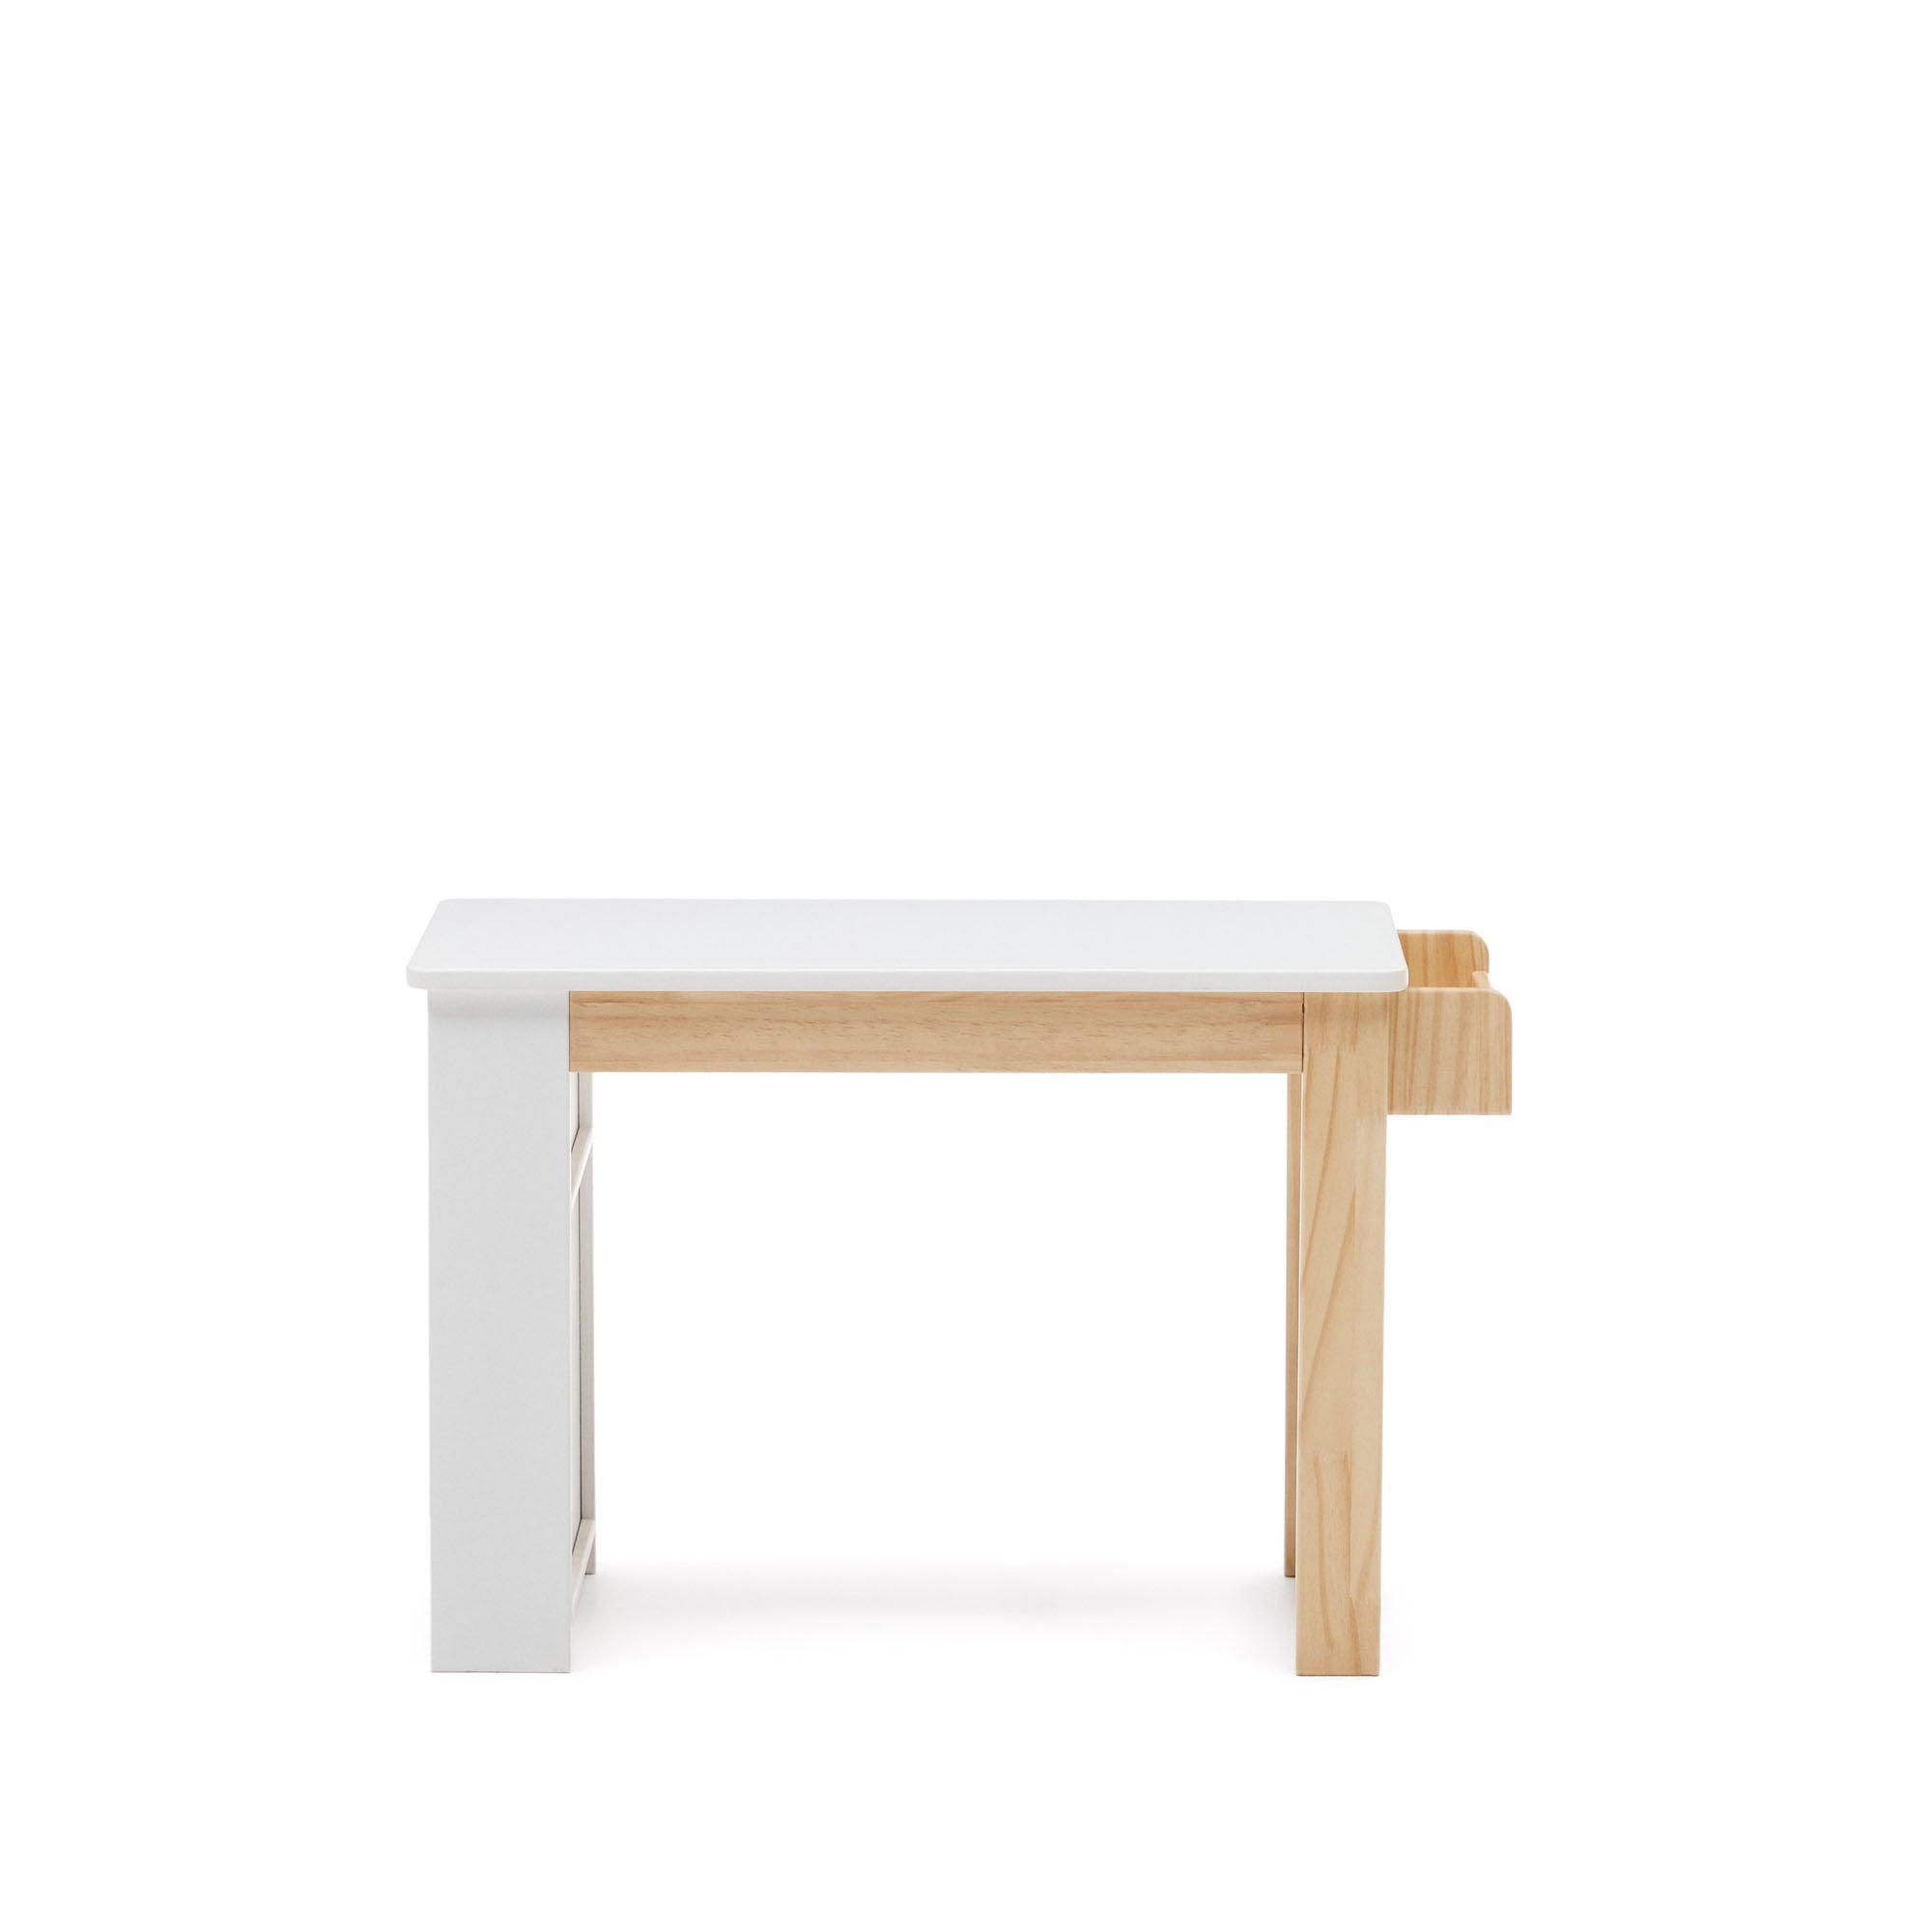 Serwa desk in white MDF and solid pine legs and details FSC MIX Credit